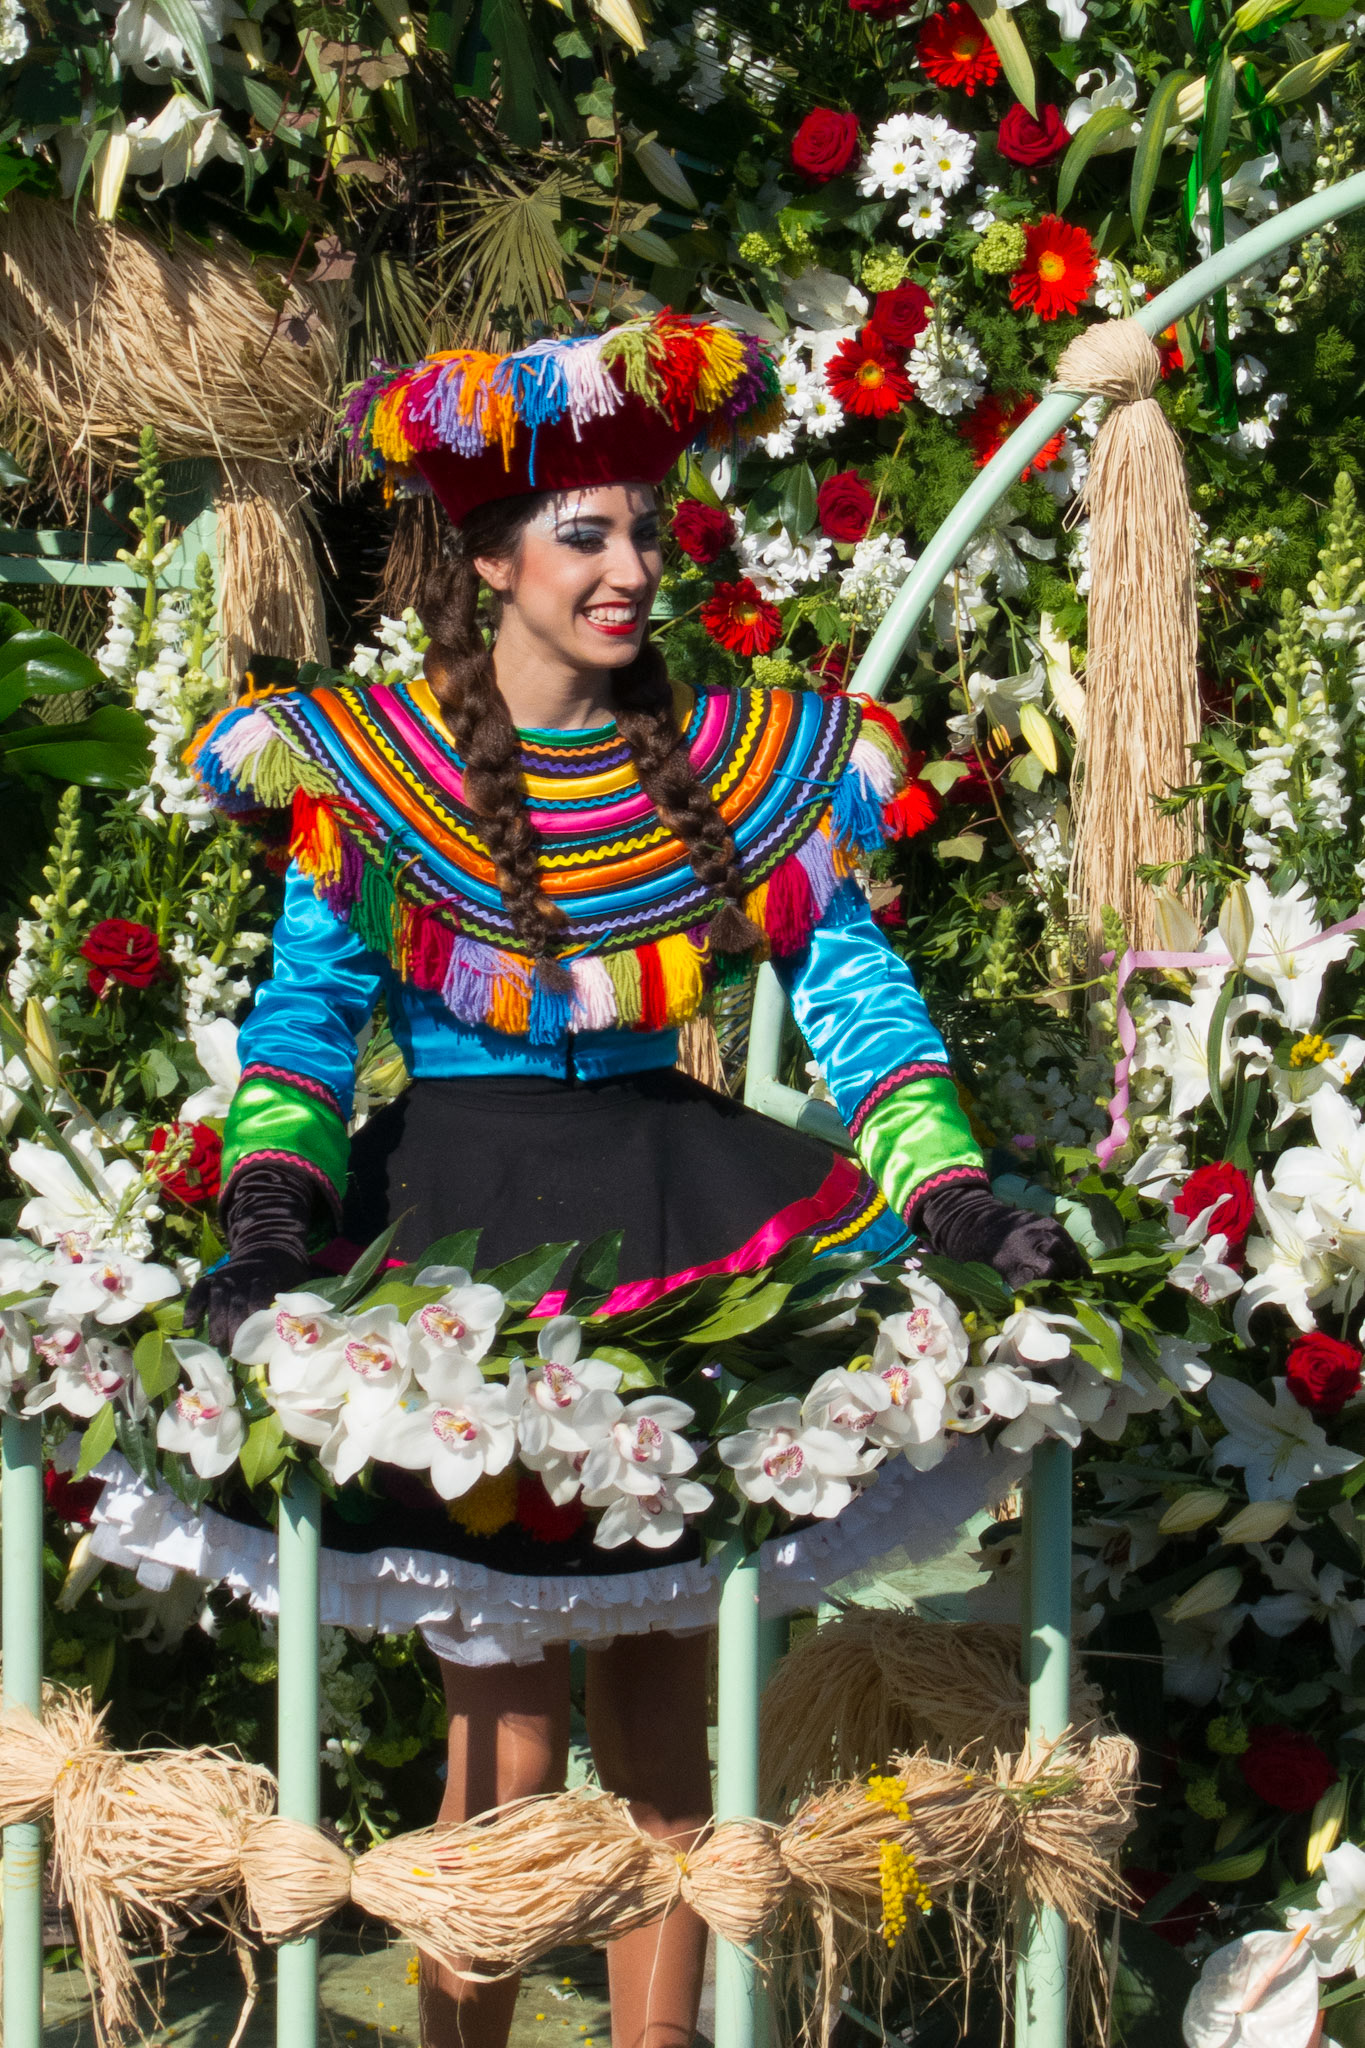 Costumes and flowers - Carnival of Nice